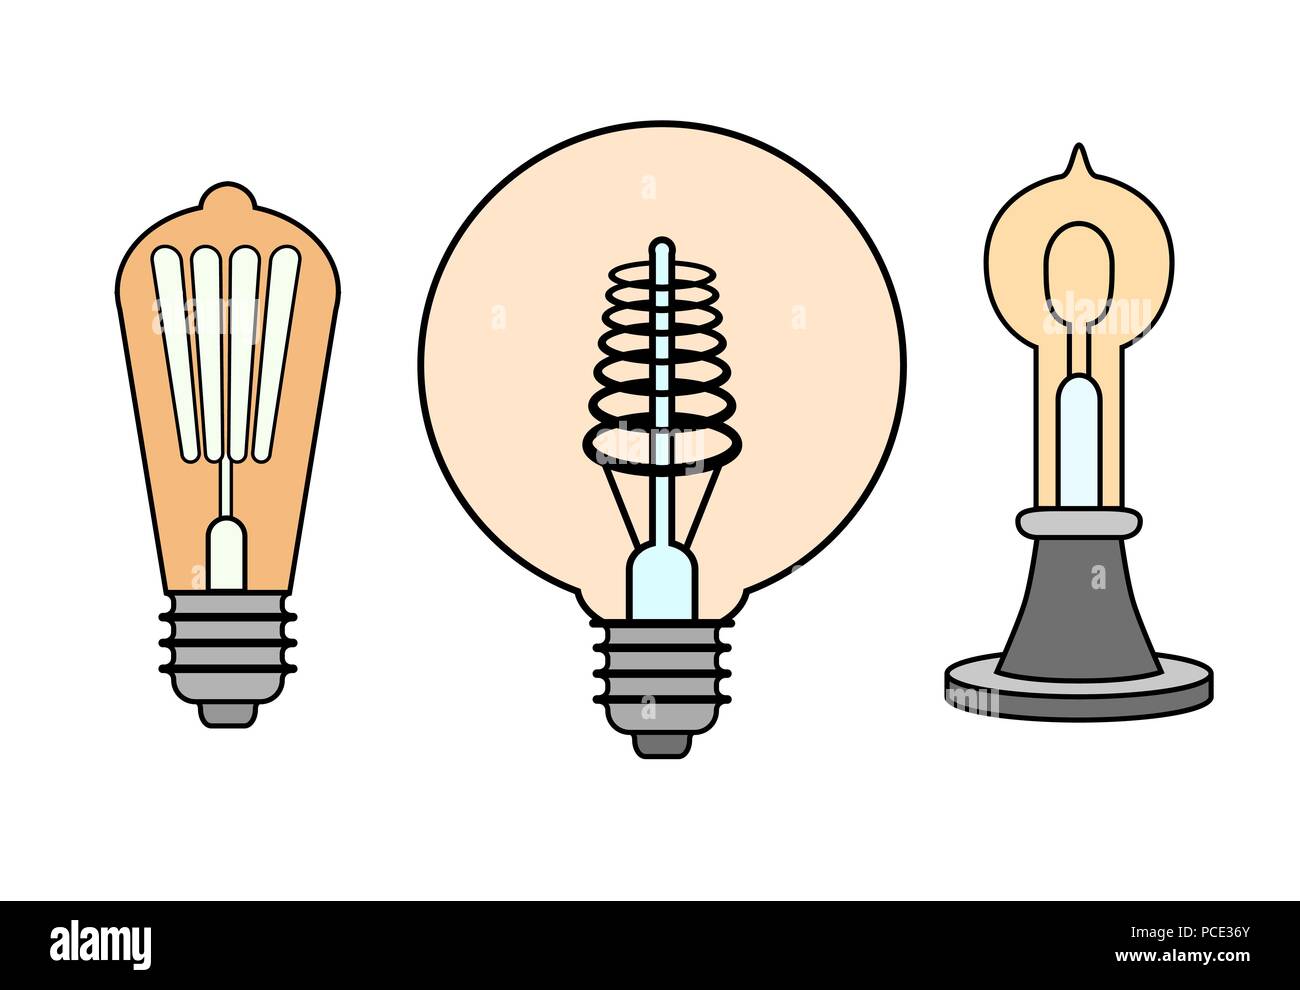 Compact fluorescent lightbulb Stock Vector Images - Alamy